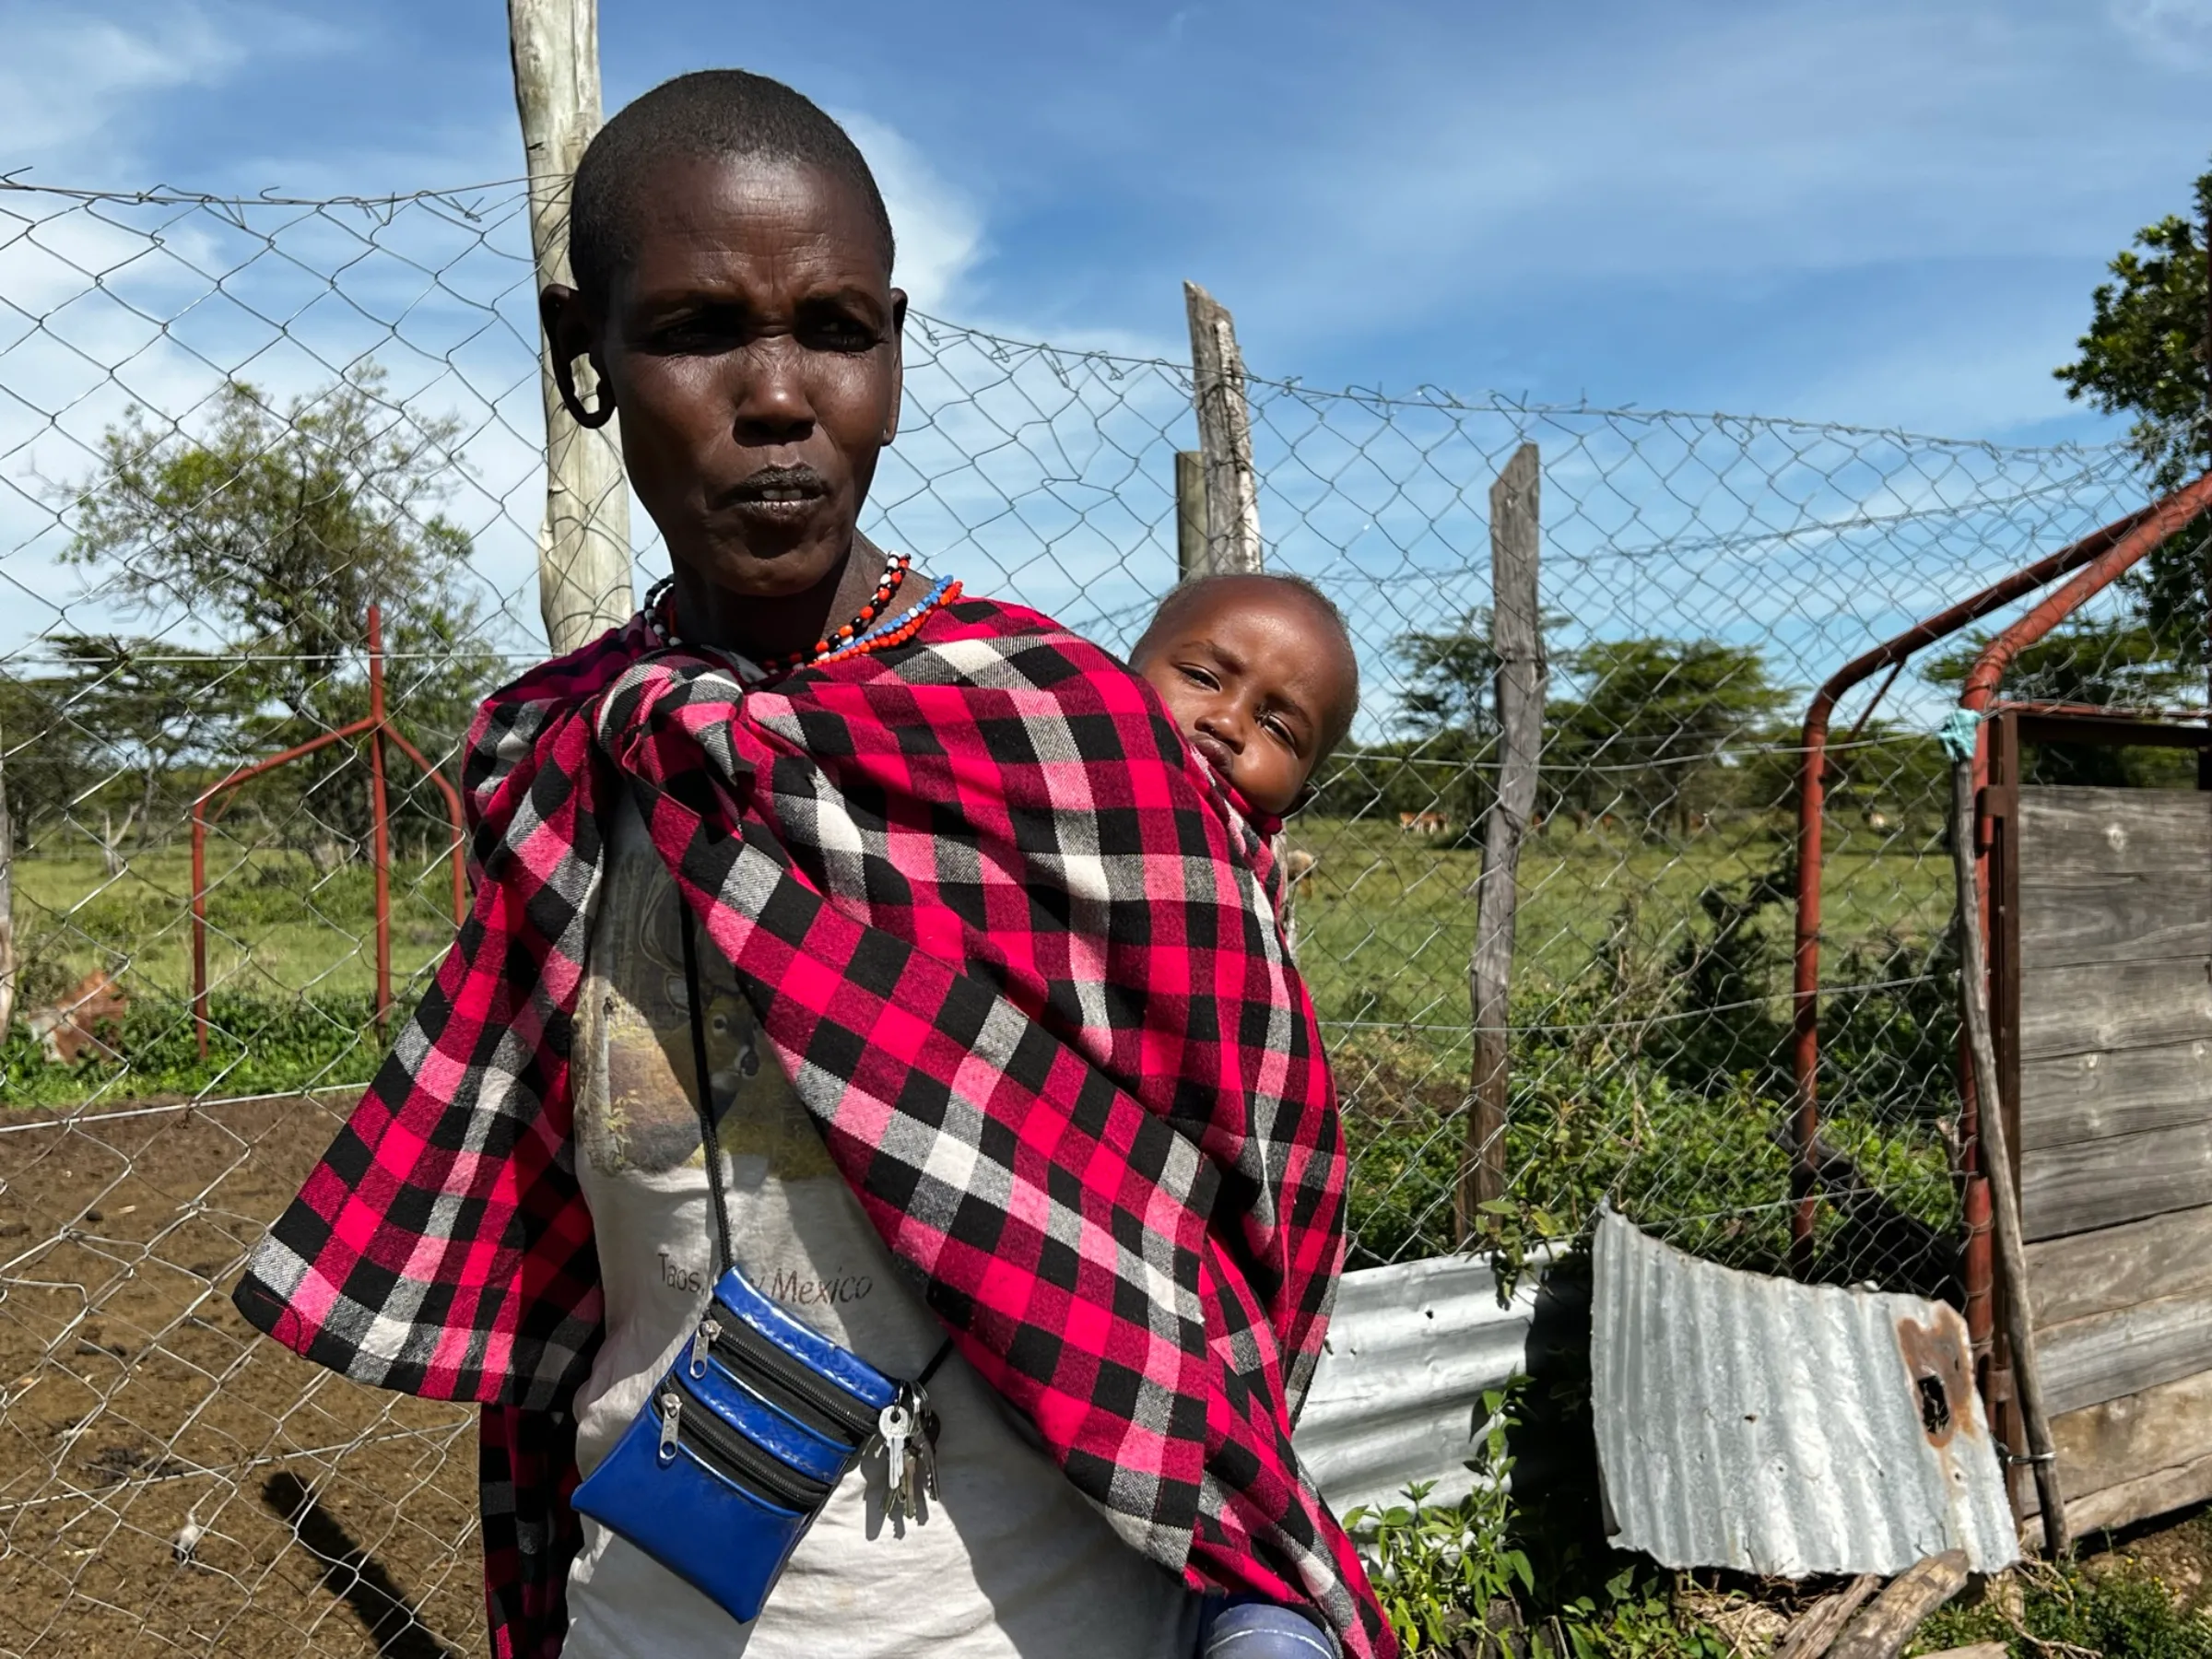 A Maasai woman stands by her fenced kraal for her livestock in Oloisukut Conservancy, bordering the Maasai Mara National Reserve, in Kenya on Sept 27, 2022. The 'predator-proof bomas' supplied by WWF Kenya helps to prevent lions attacking her cattle during droughts